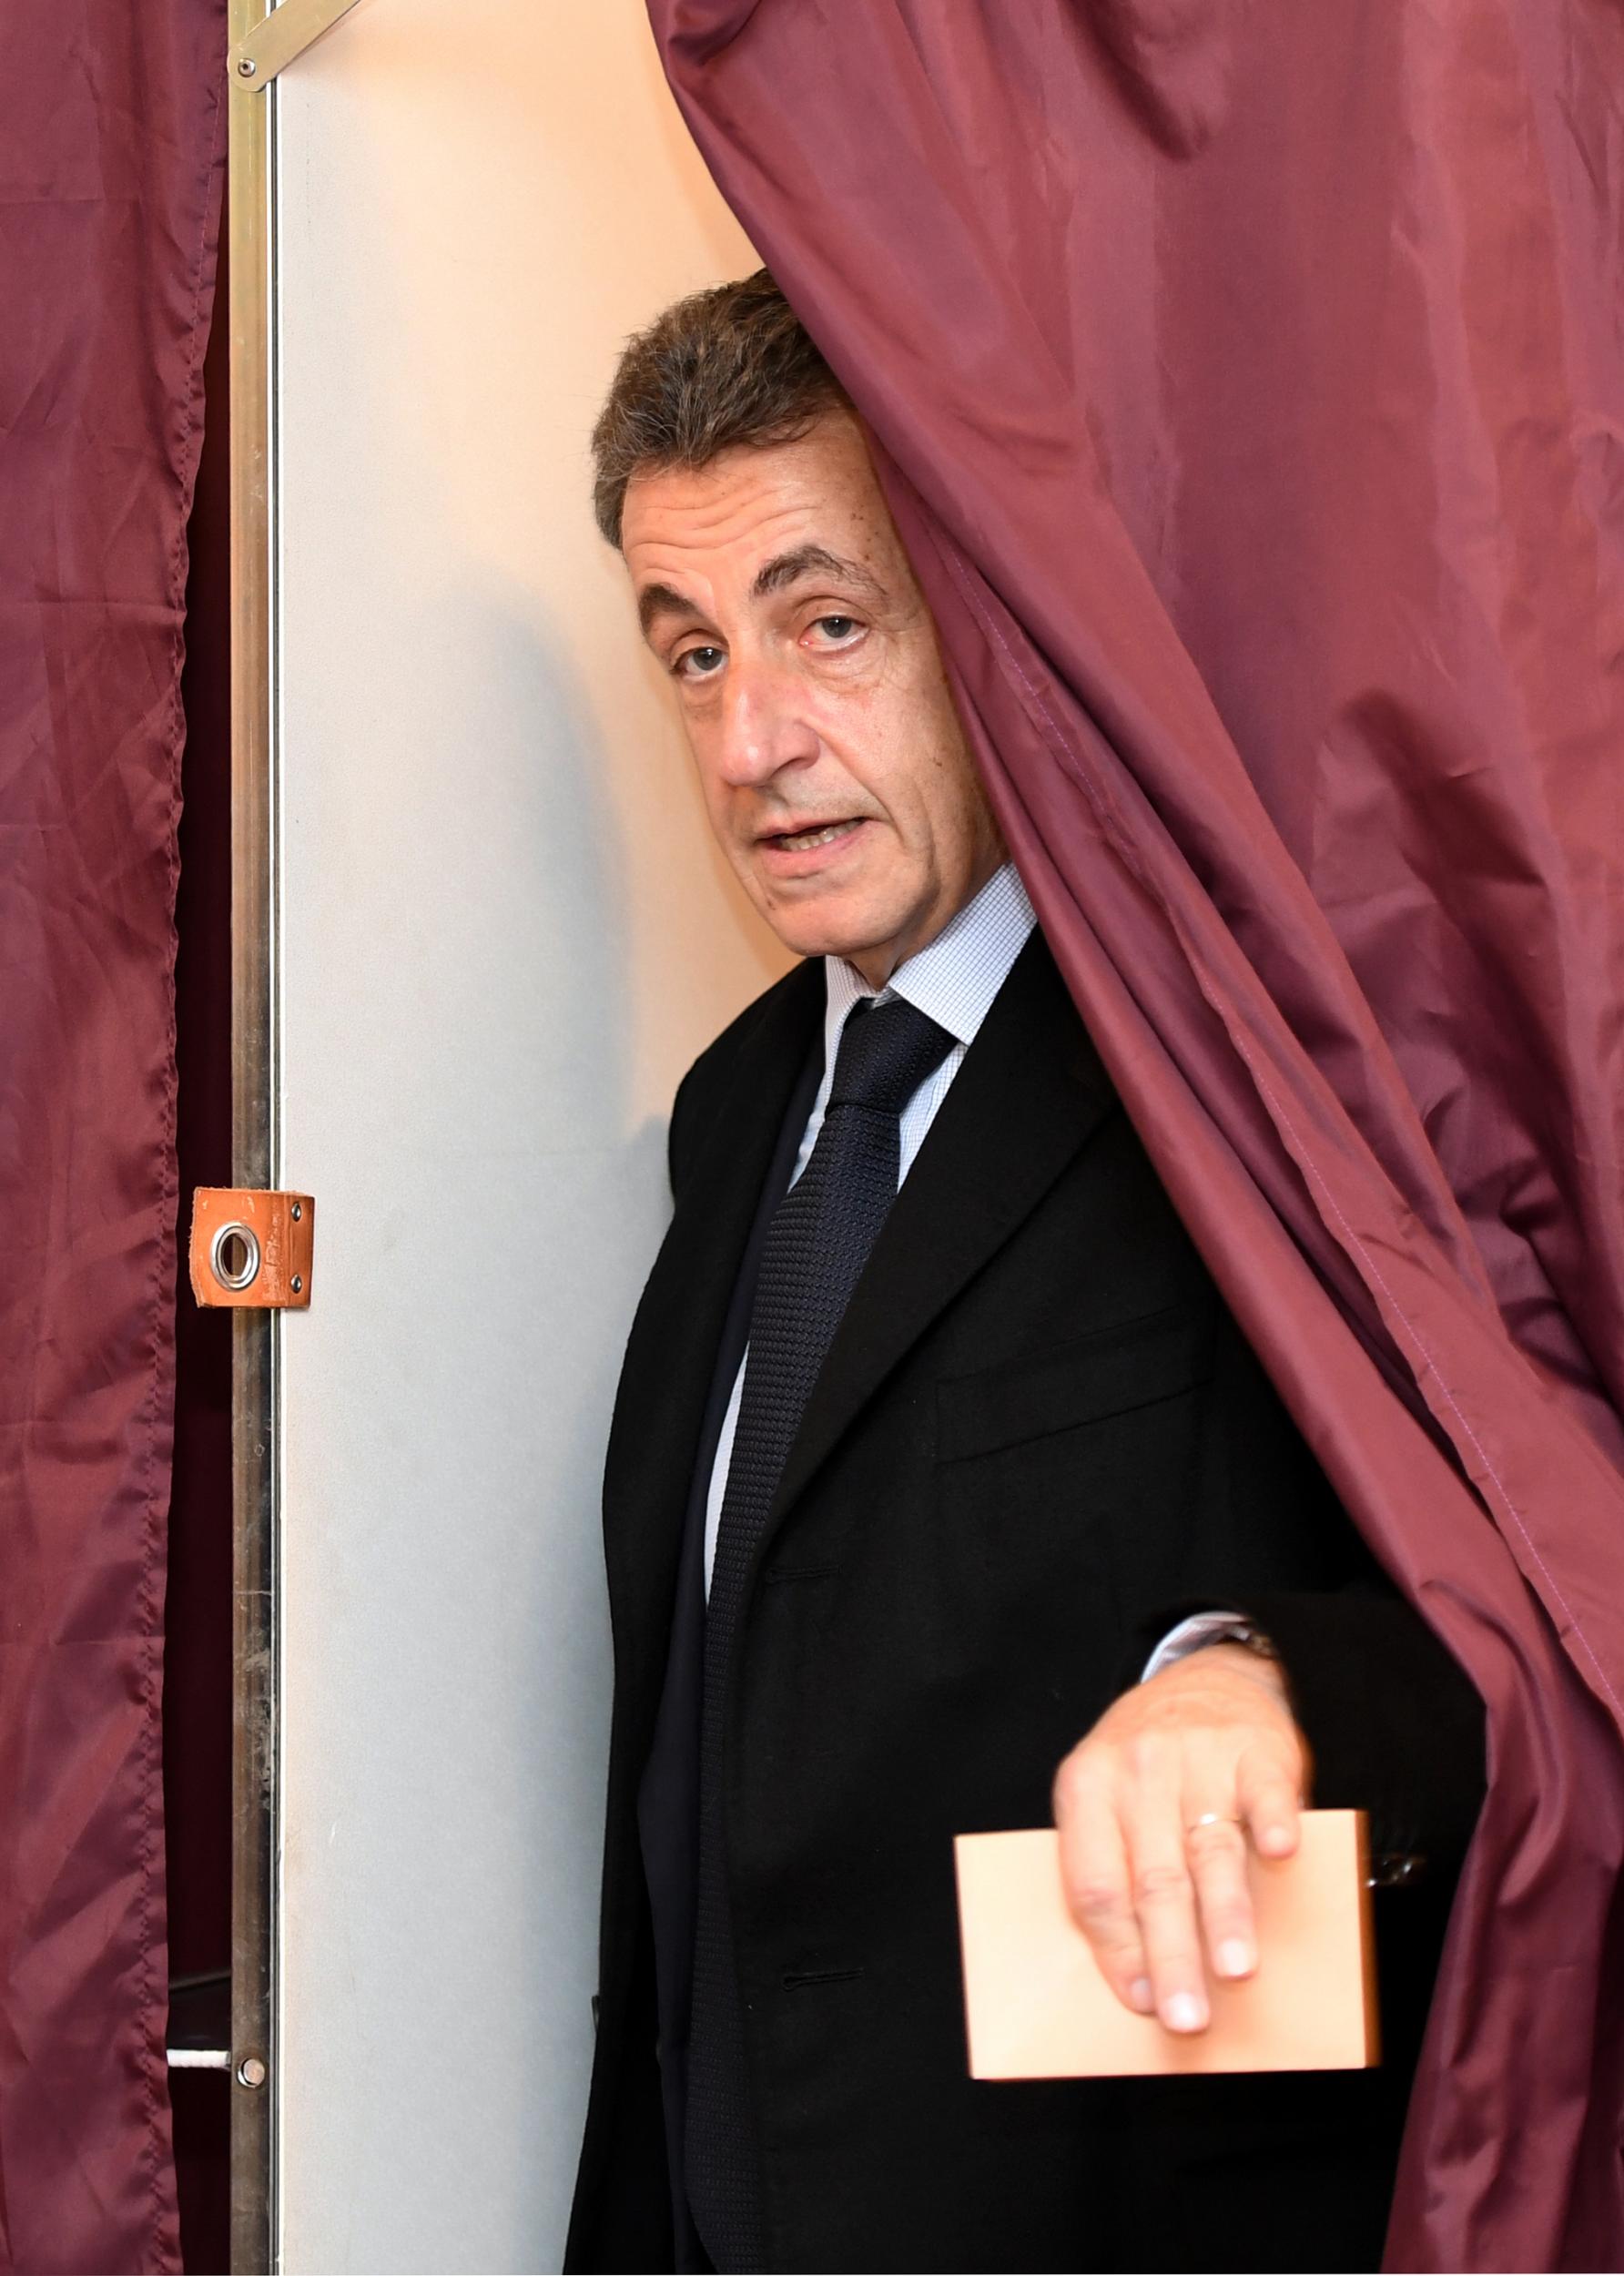 Nicolas Sarkozy, former French president and candidate for the French conservative presidential primary, votes in the first round of the French center-right presidential primary election in Paris, France, November 20, 2016